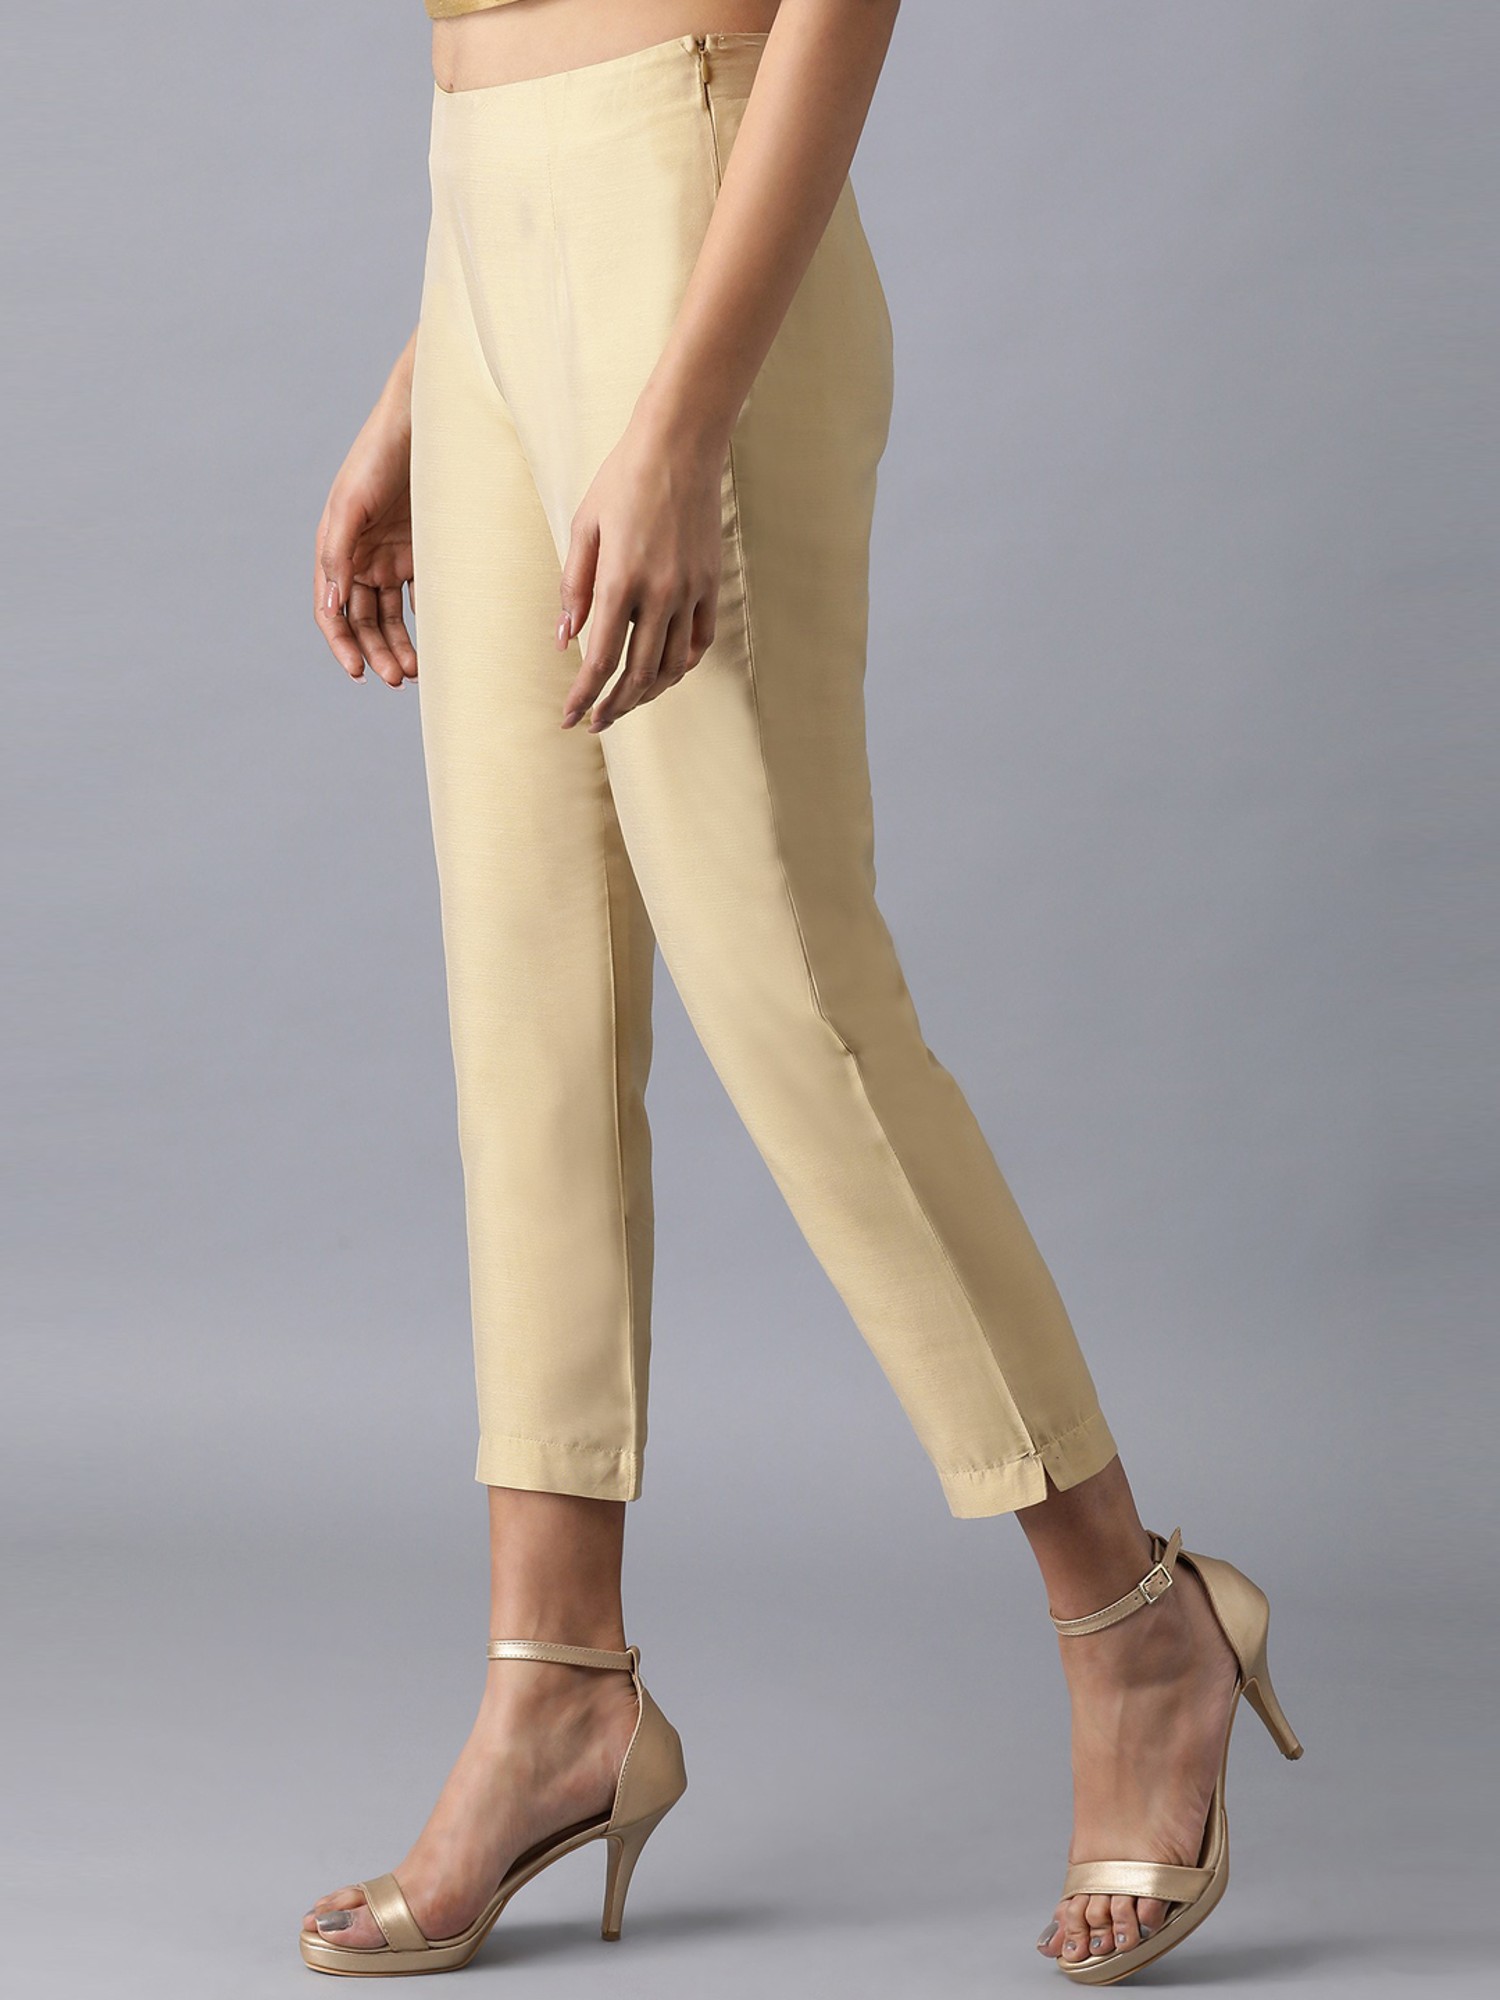 Buy ANUSHIL White Pants with Elegant Golden Foil Print - Slim Fit Women's  Trousers (Colour - White, Size - S) at Amazon.in